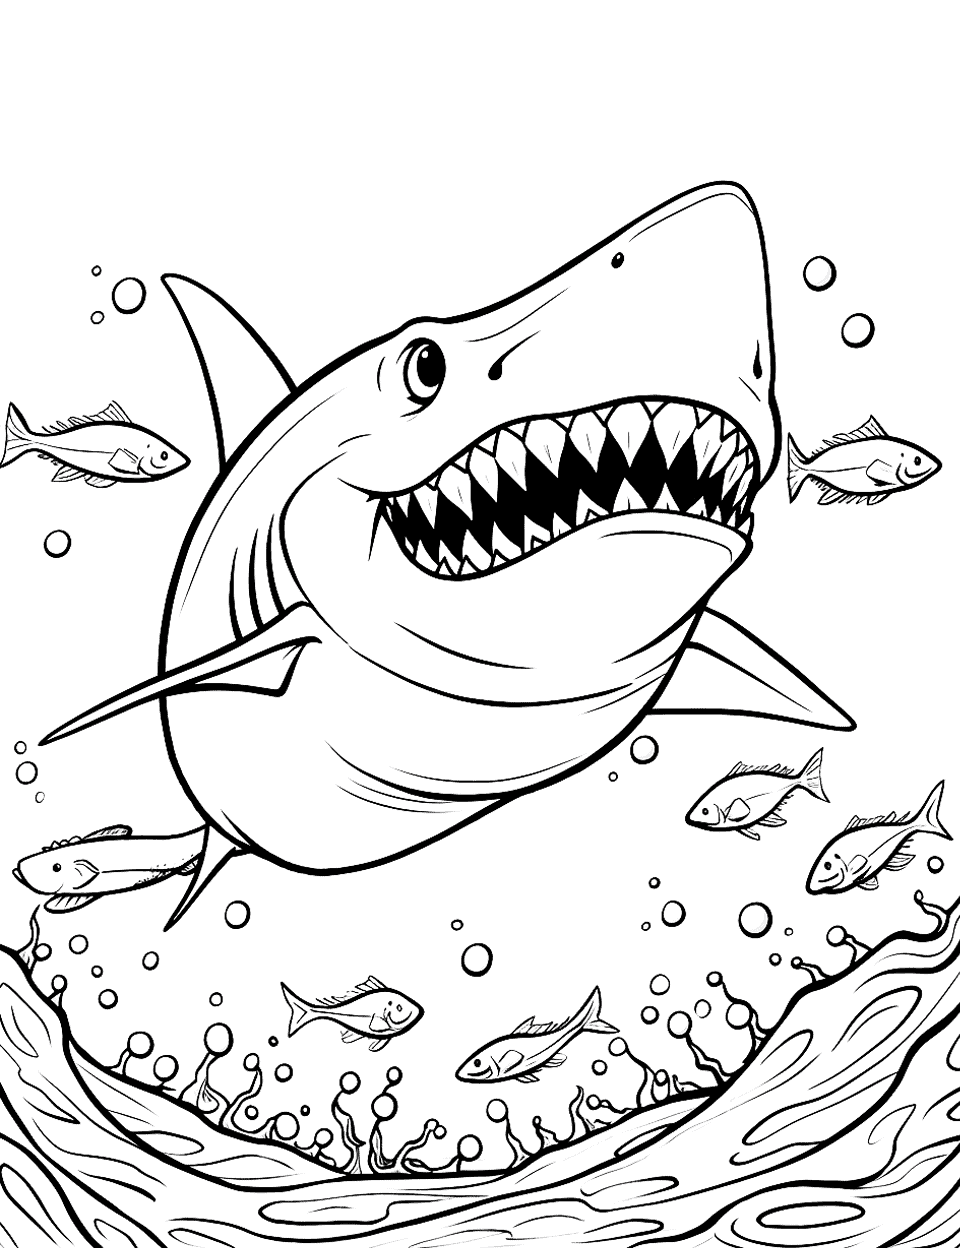 King Shark's Feast Shark Coloring Page - A king shark about to feast on a school of fish.